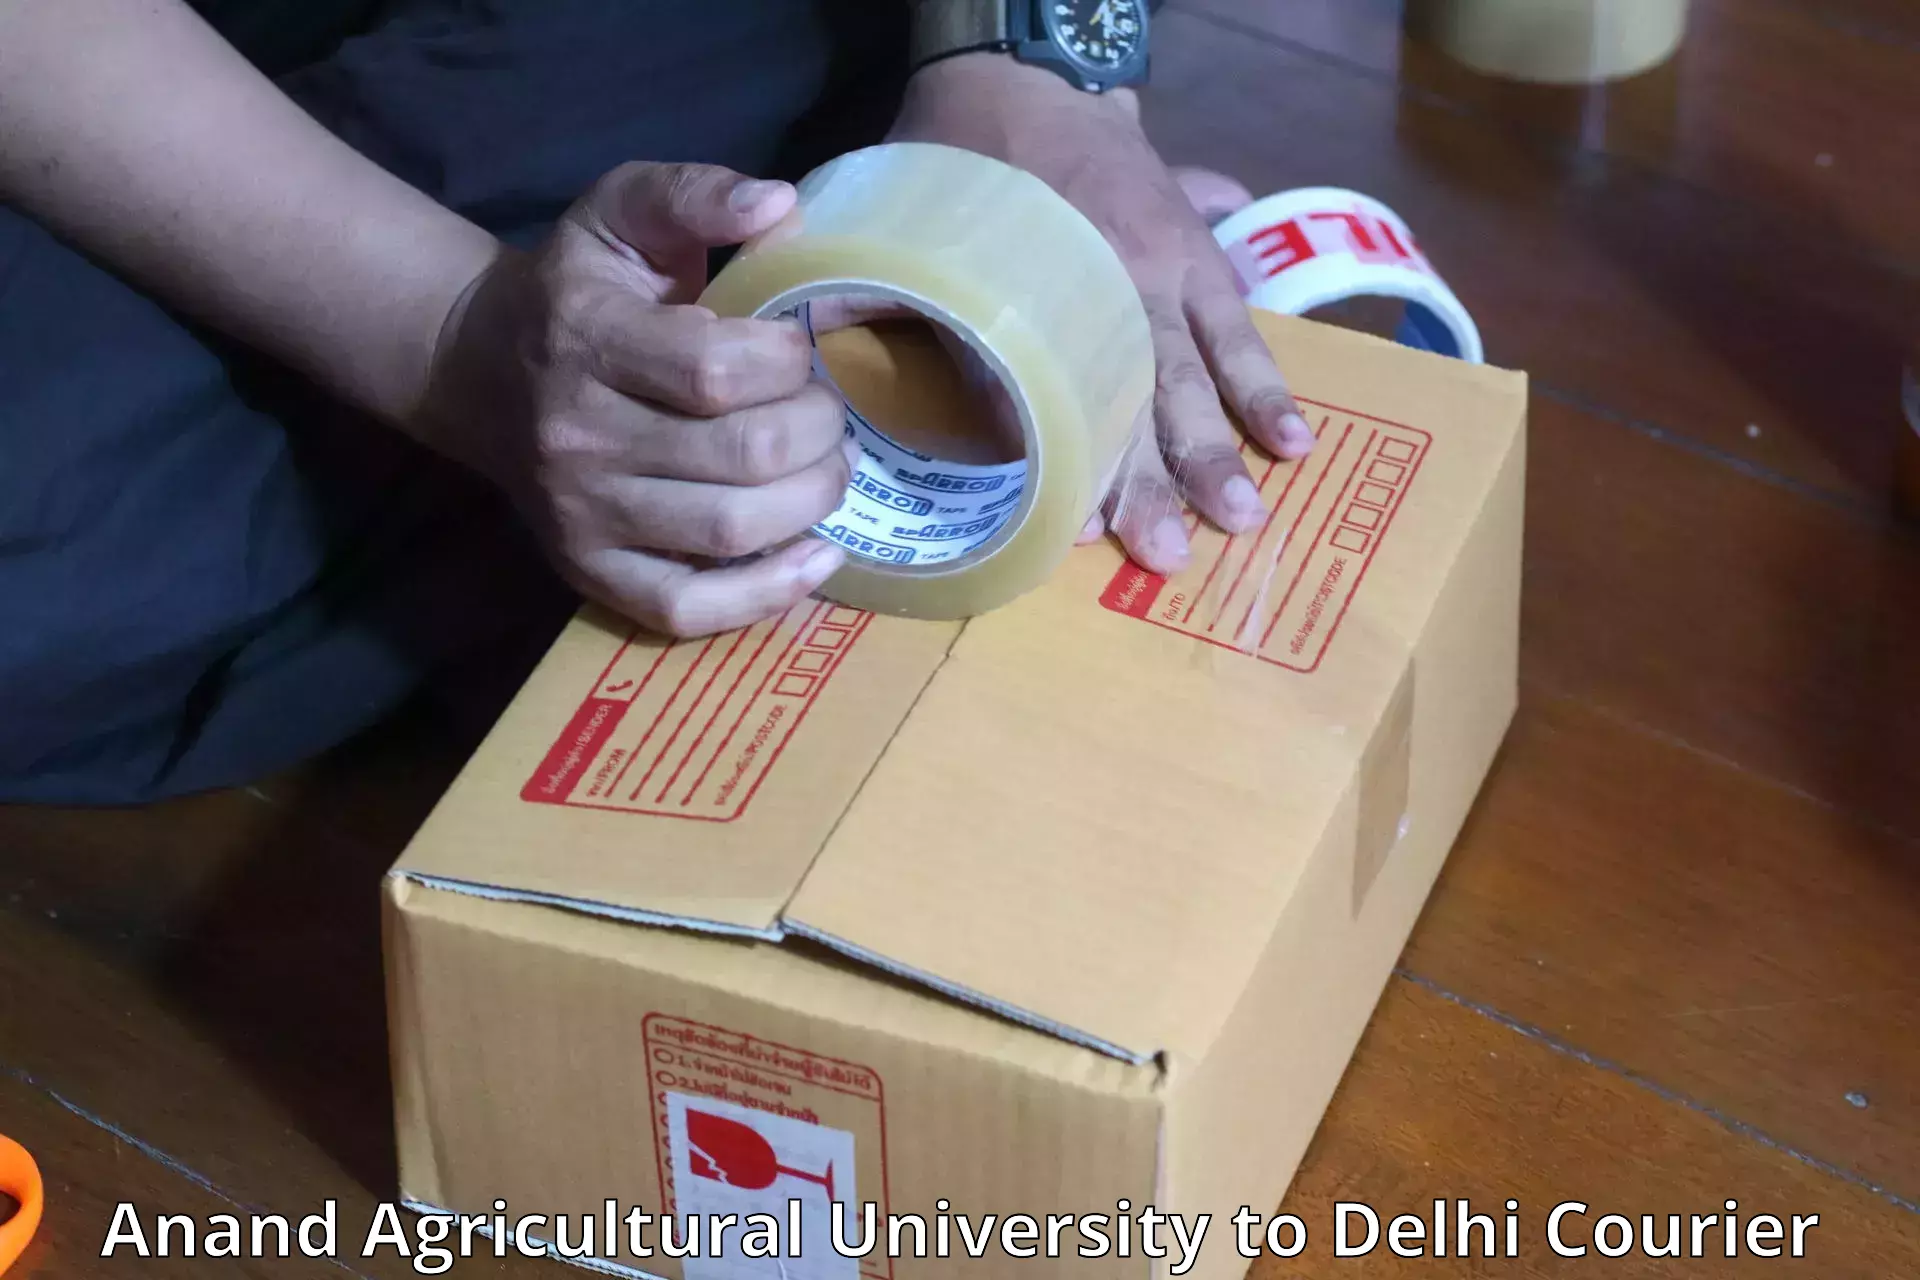 Baggage relocation service Anand Agricultural University to NCR